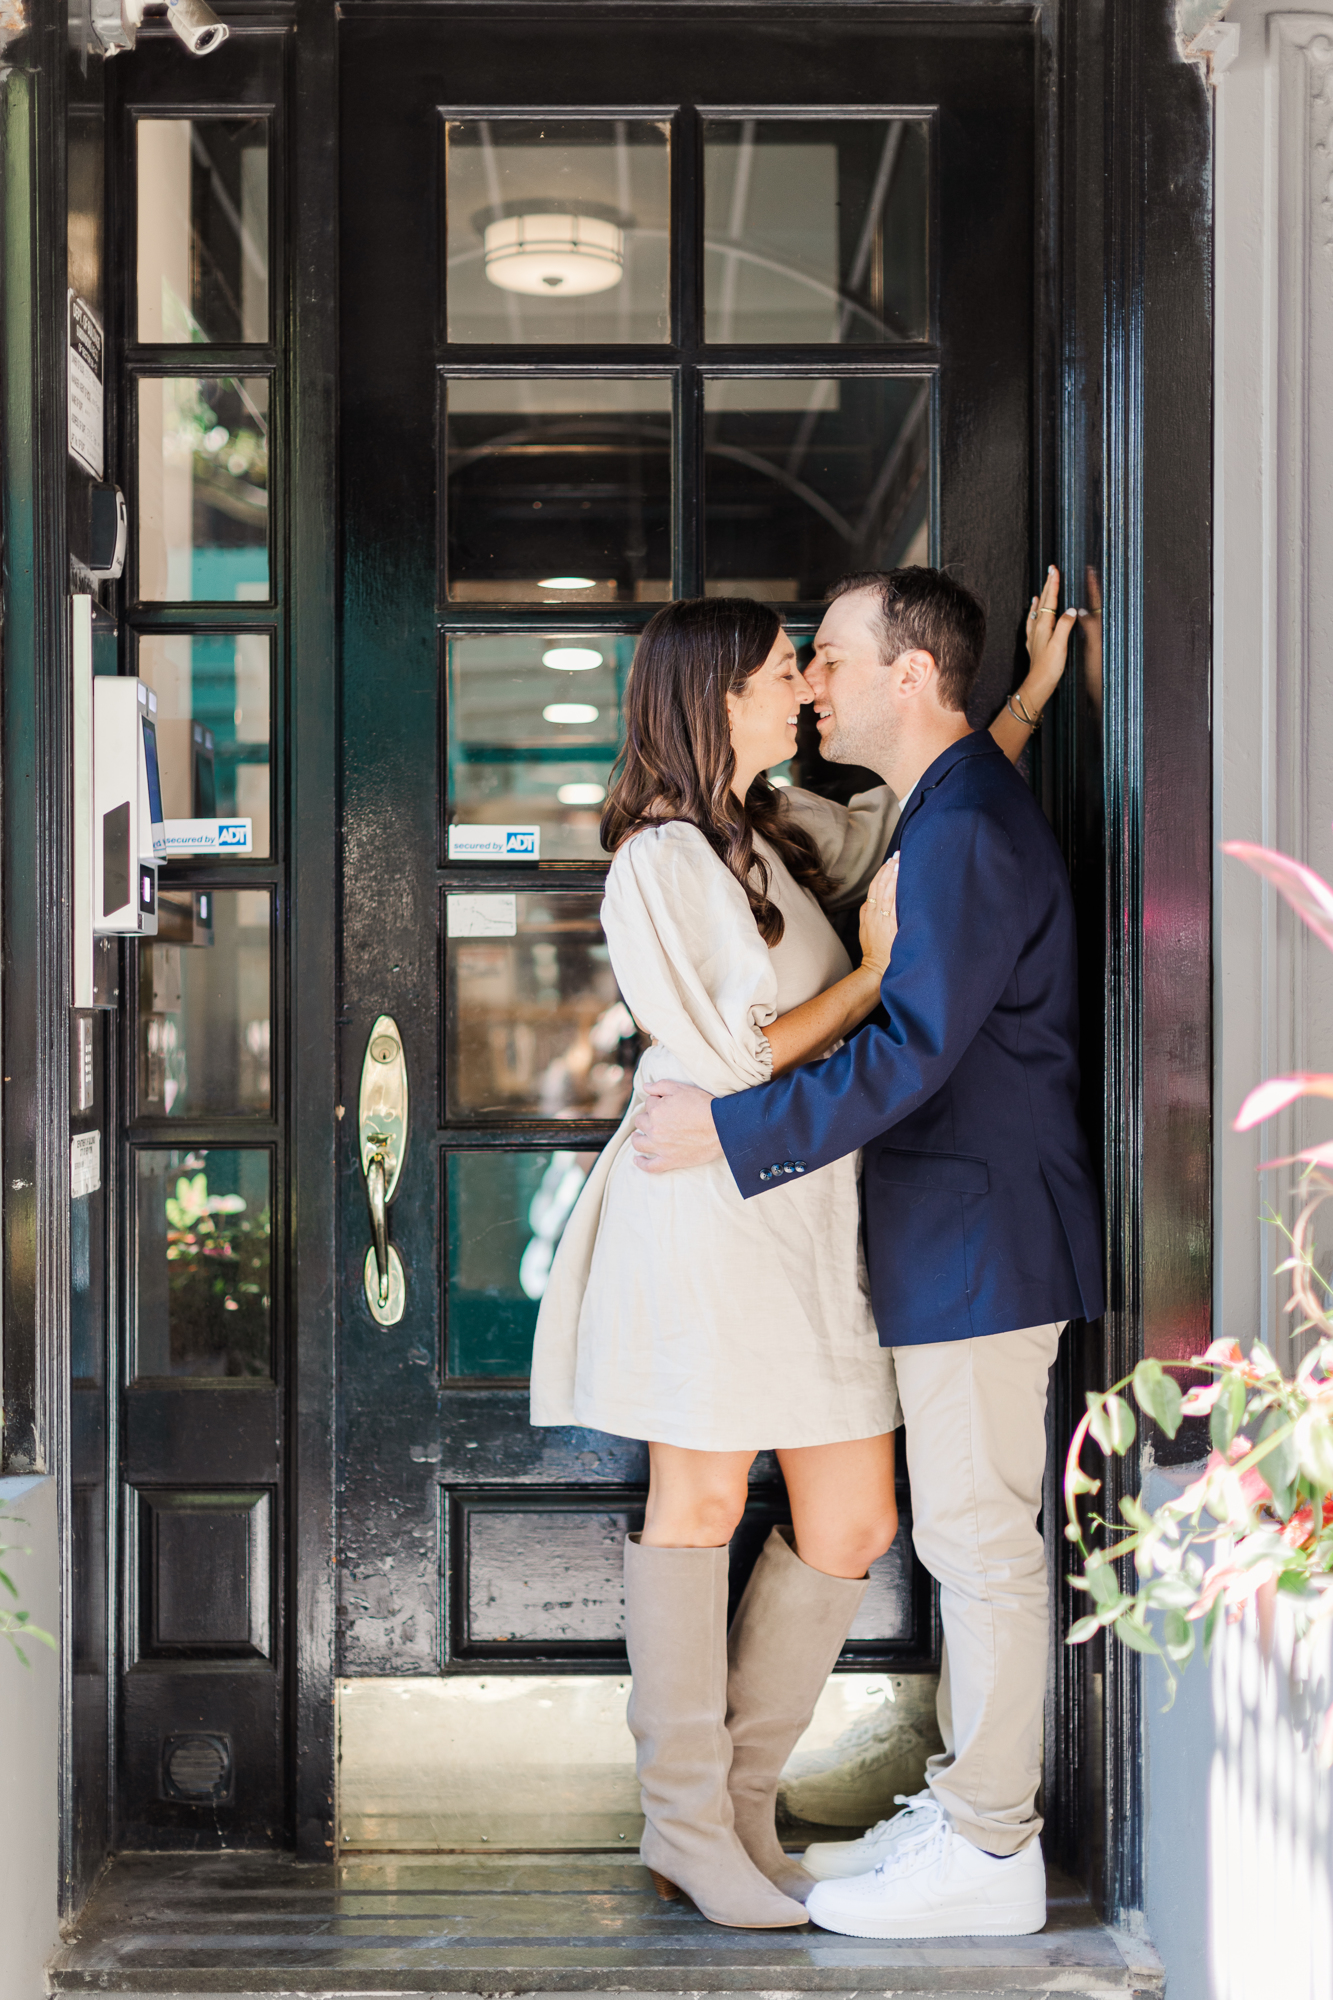 Charming Engagement Photos In Upper East Side